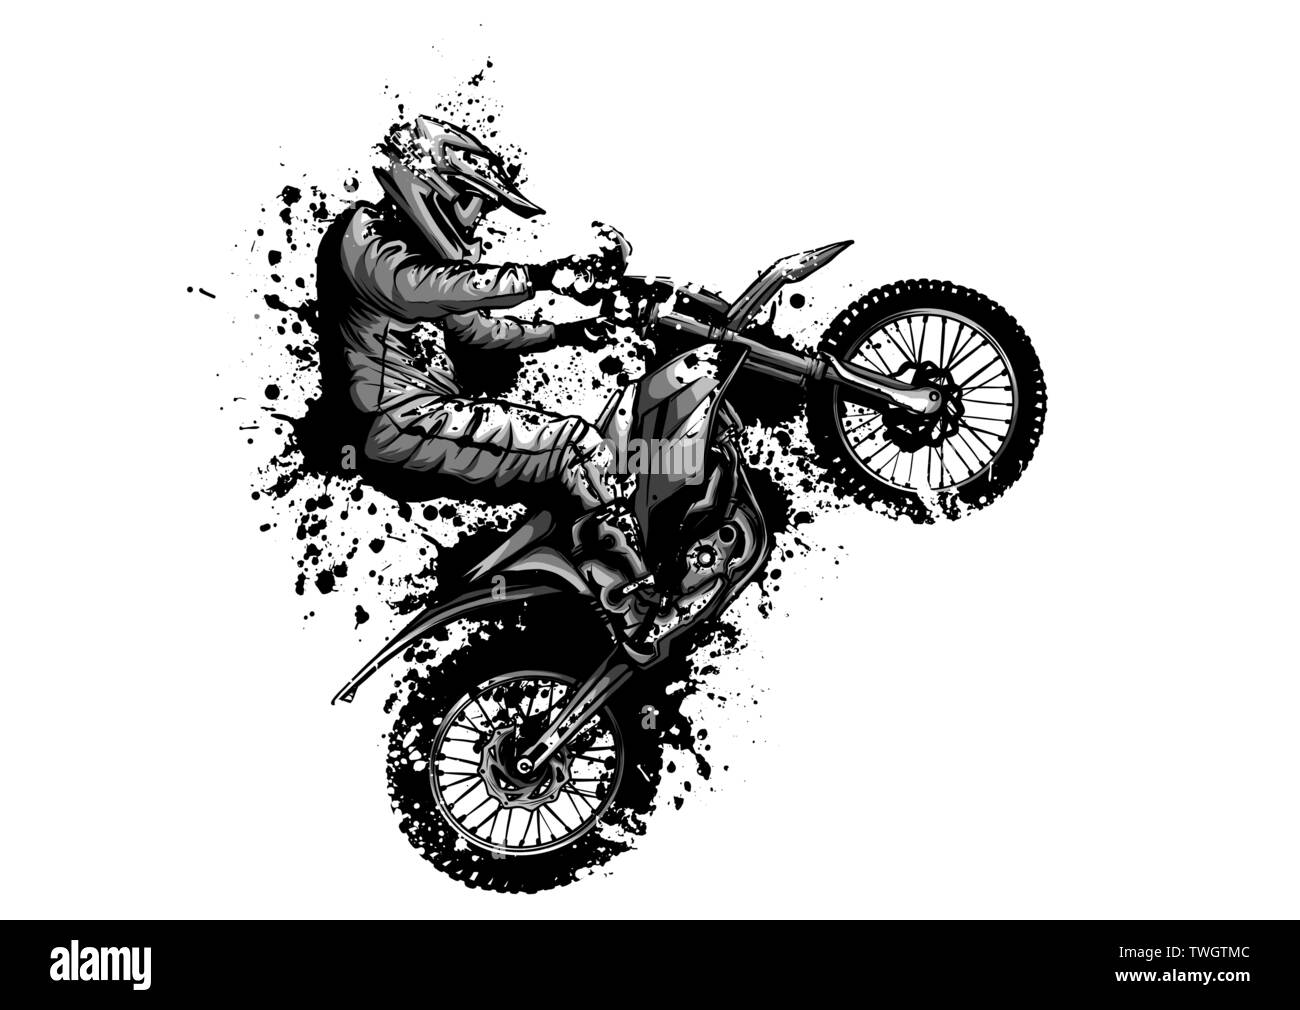 Motocross vector Black and White Stock Photos & Images - Alamy